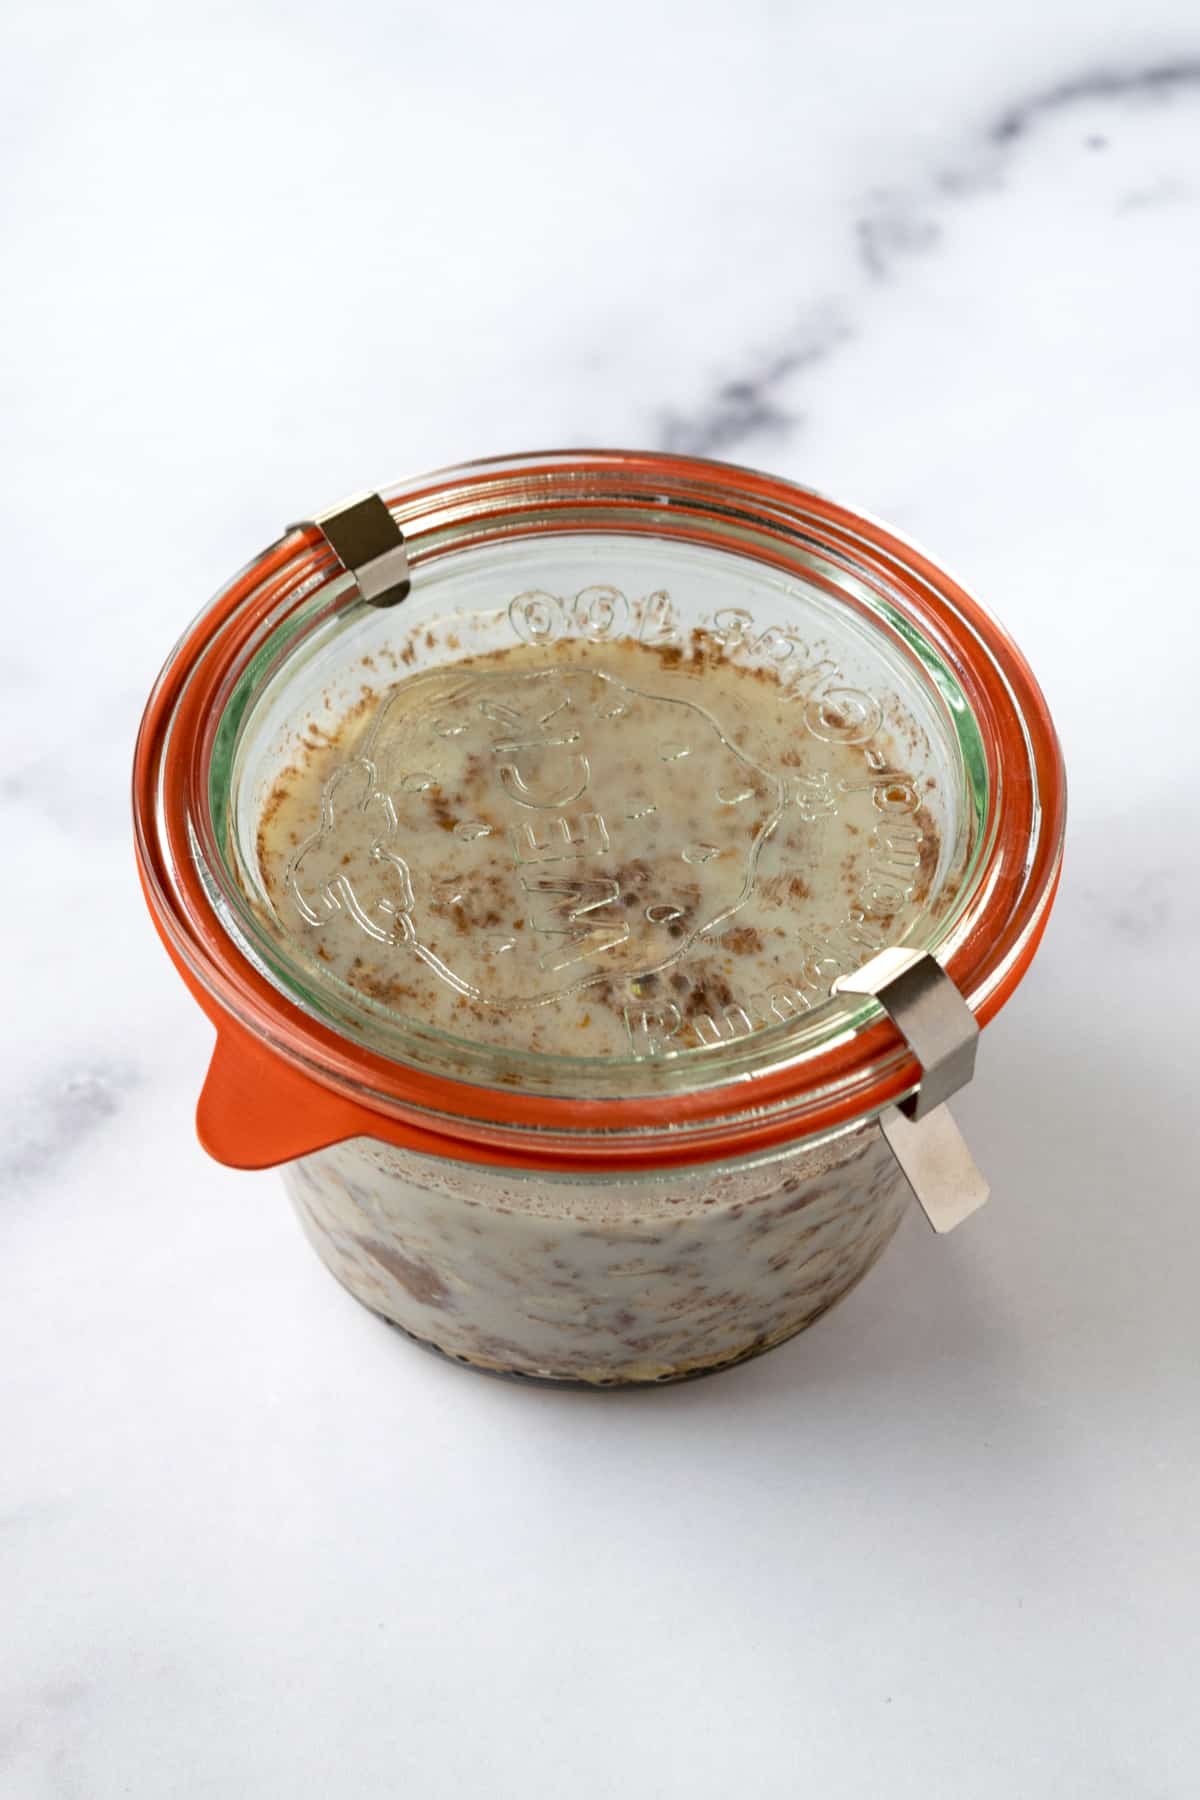 Cookie Dough Overnight Oats in a glass jar.